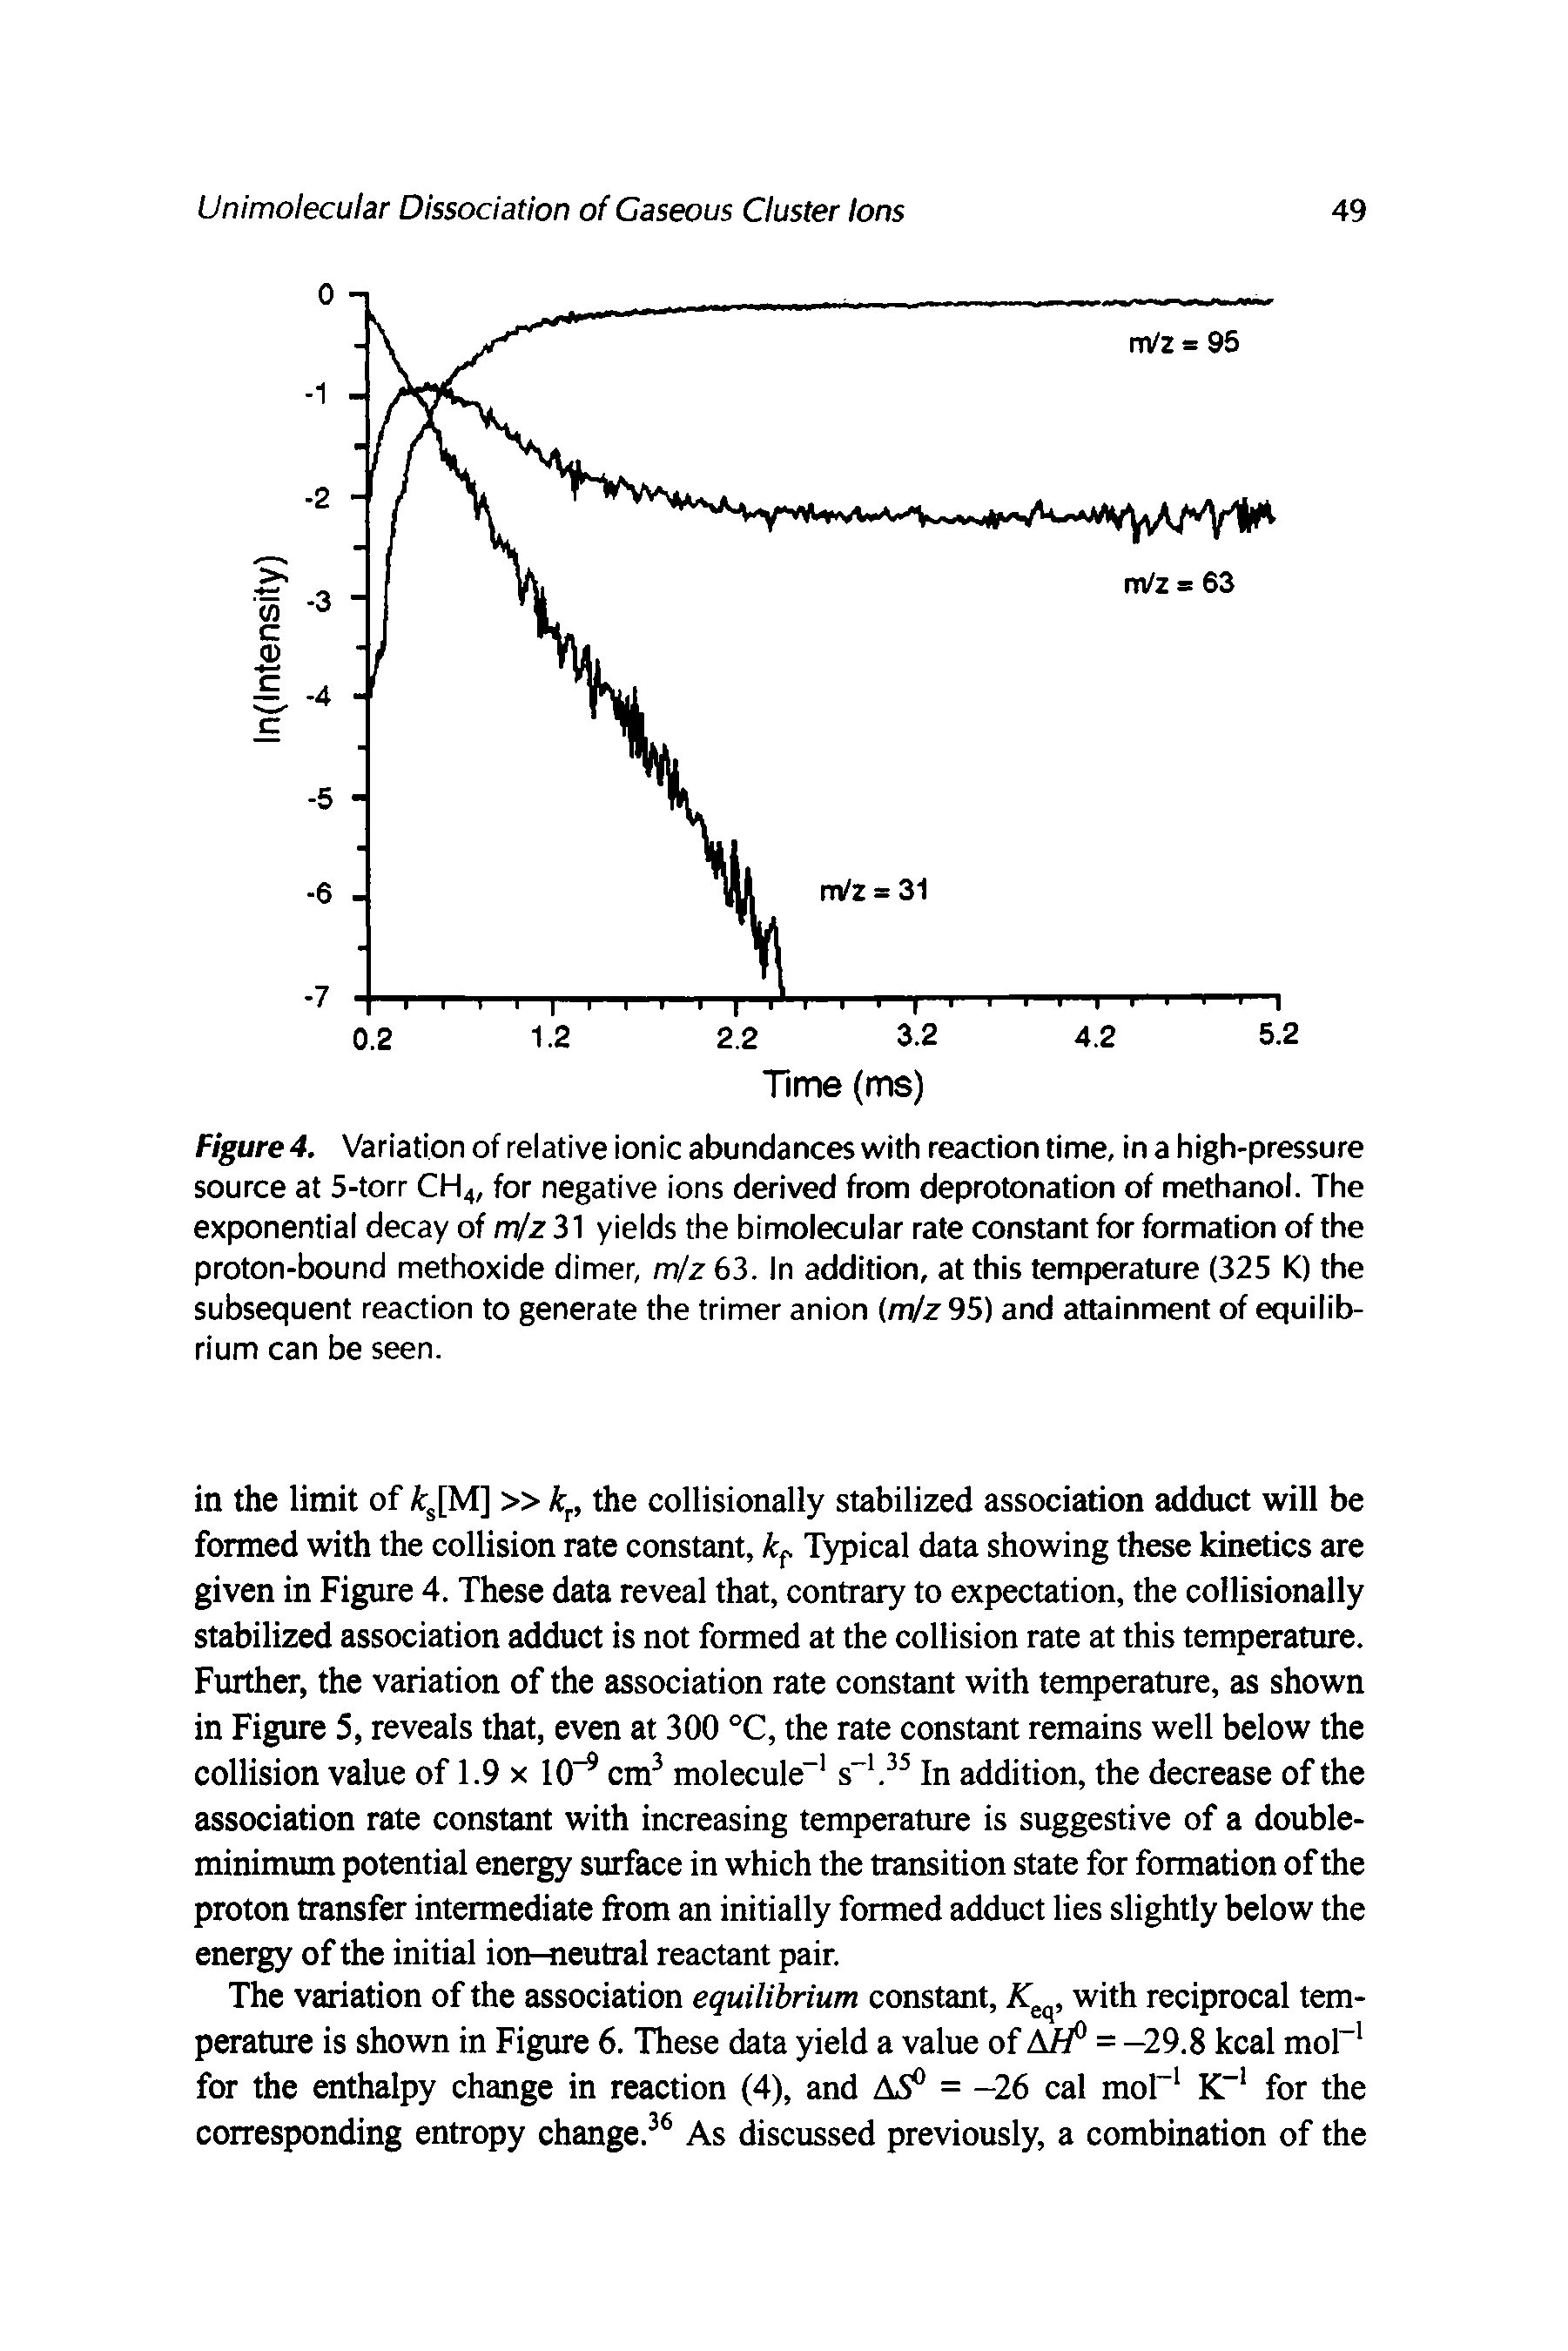 Figure 4. Variation of relative ionic abundances with reaction time, in a high-pressure source at 5-torr CH4, for negative ions derived from deprotonation of methanol. The exponential decay of rr /z 31 yields the bimolecular rate constant for formation of the proton-bound methoxide dimer, m/z 63. In addition, at this temperature (325 K) the subsequent reaction to generate the trimer anion (m/z 95) and attainment of equilibrium can be seen.